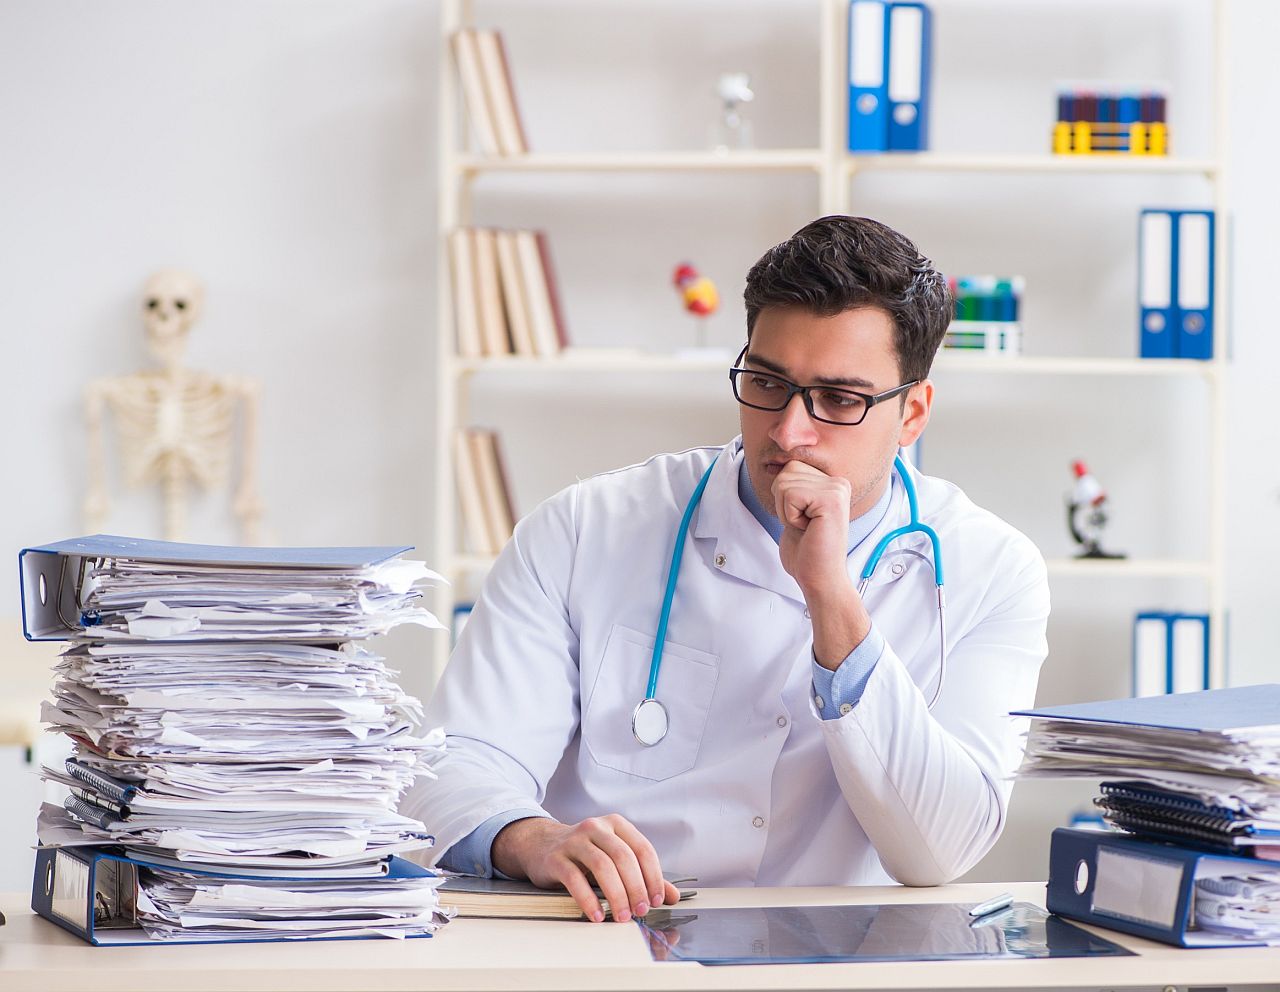 Doctor with stethoscope around his neck, sitting at his desk, looks at stack of files and papers; specialty therapies concept